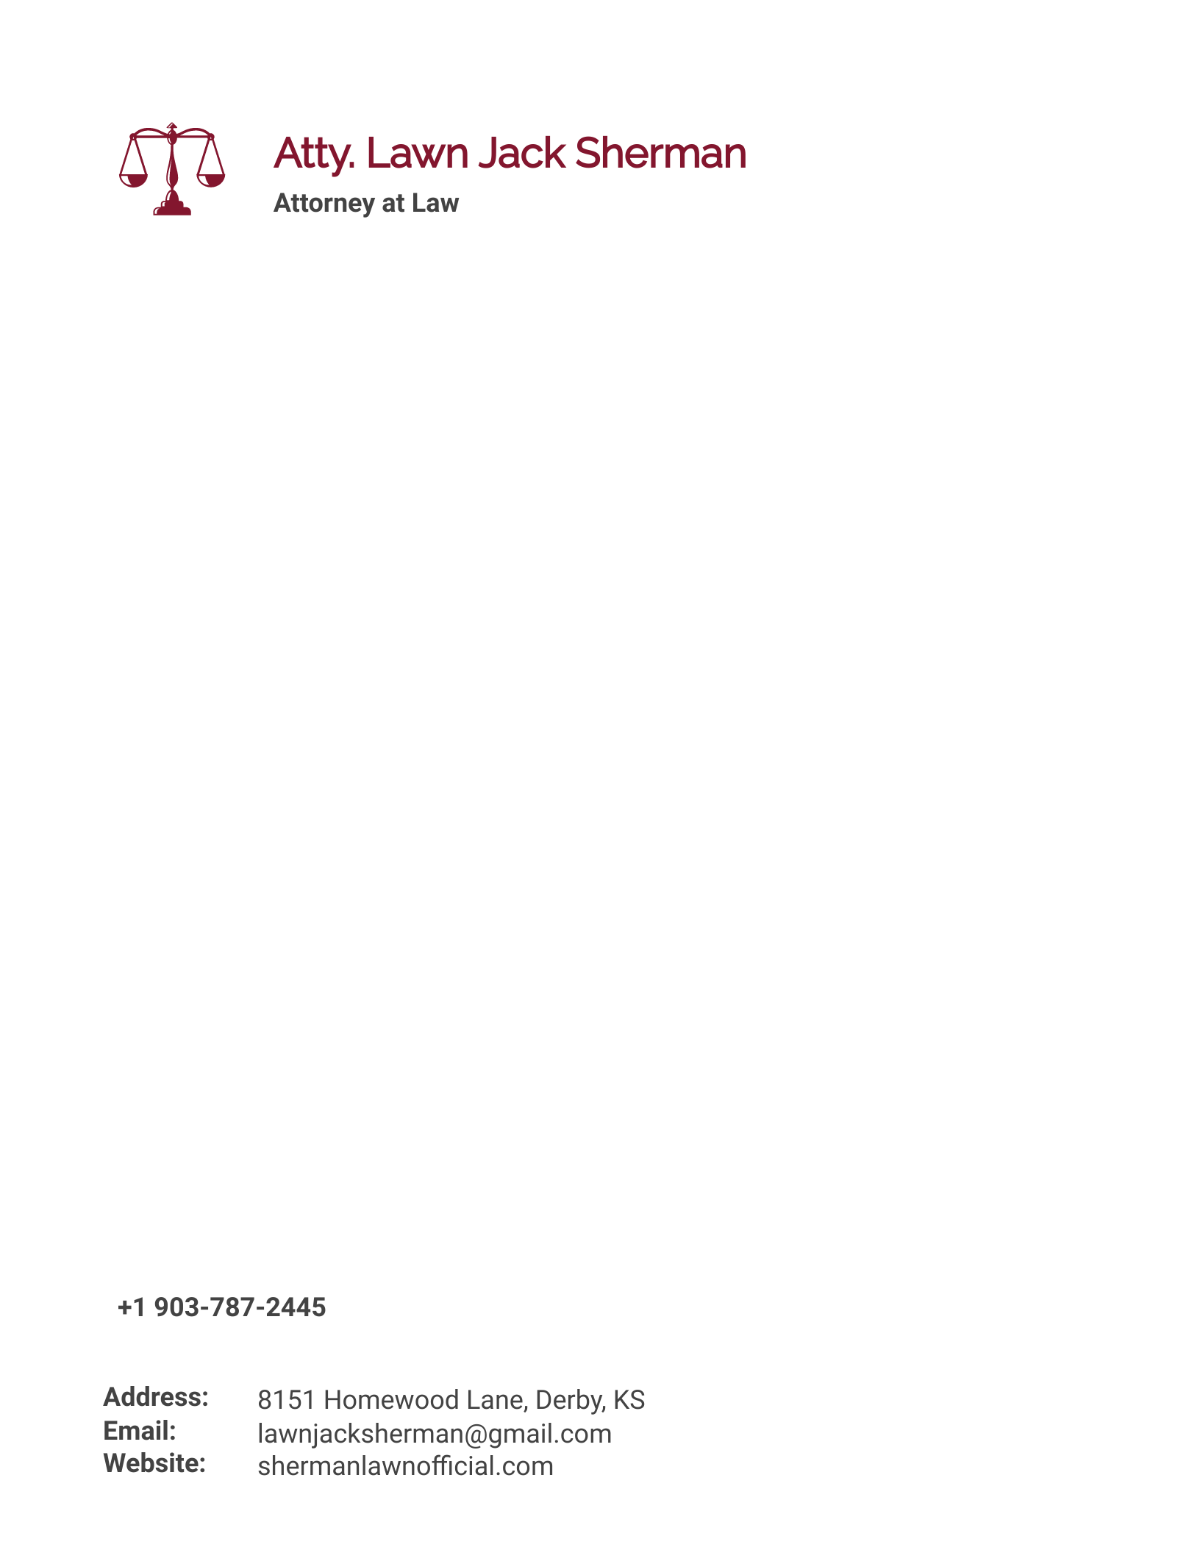 Attorney at Law Letterhead Template